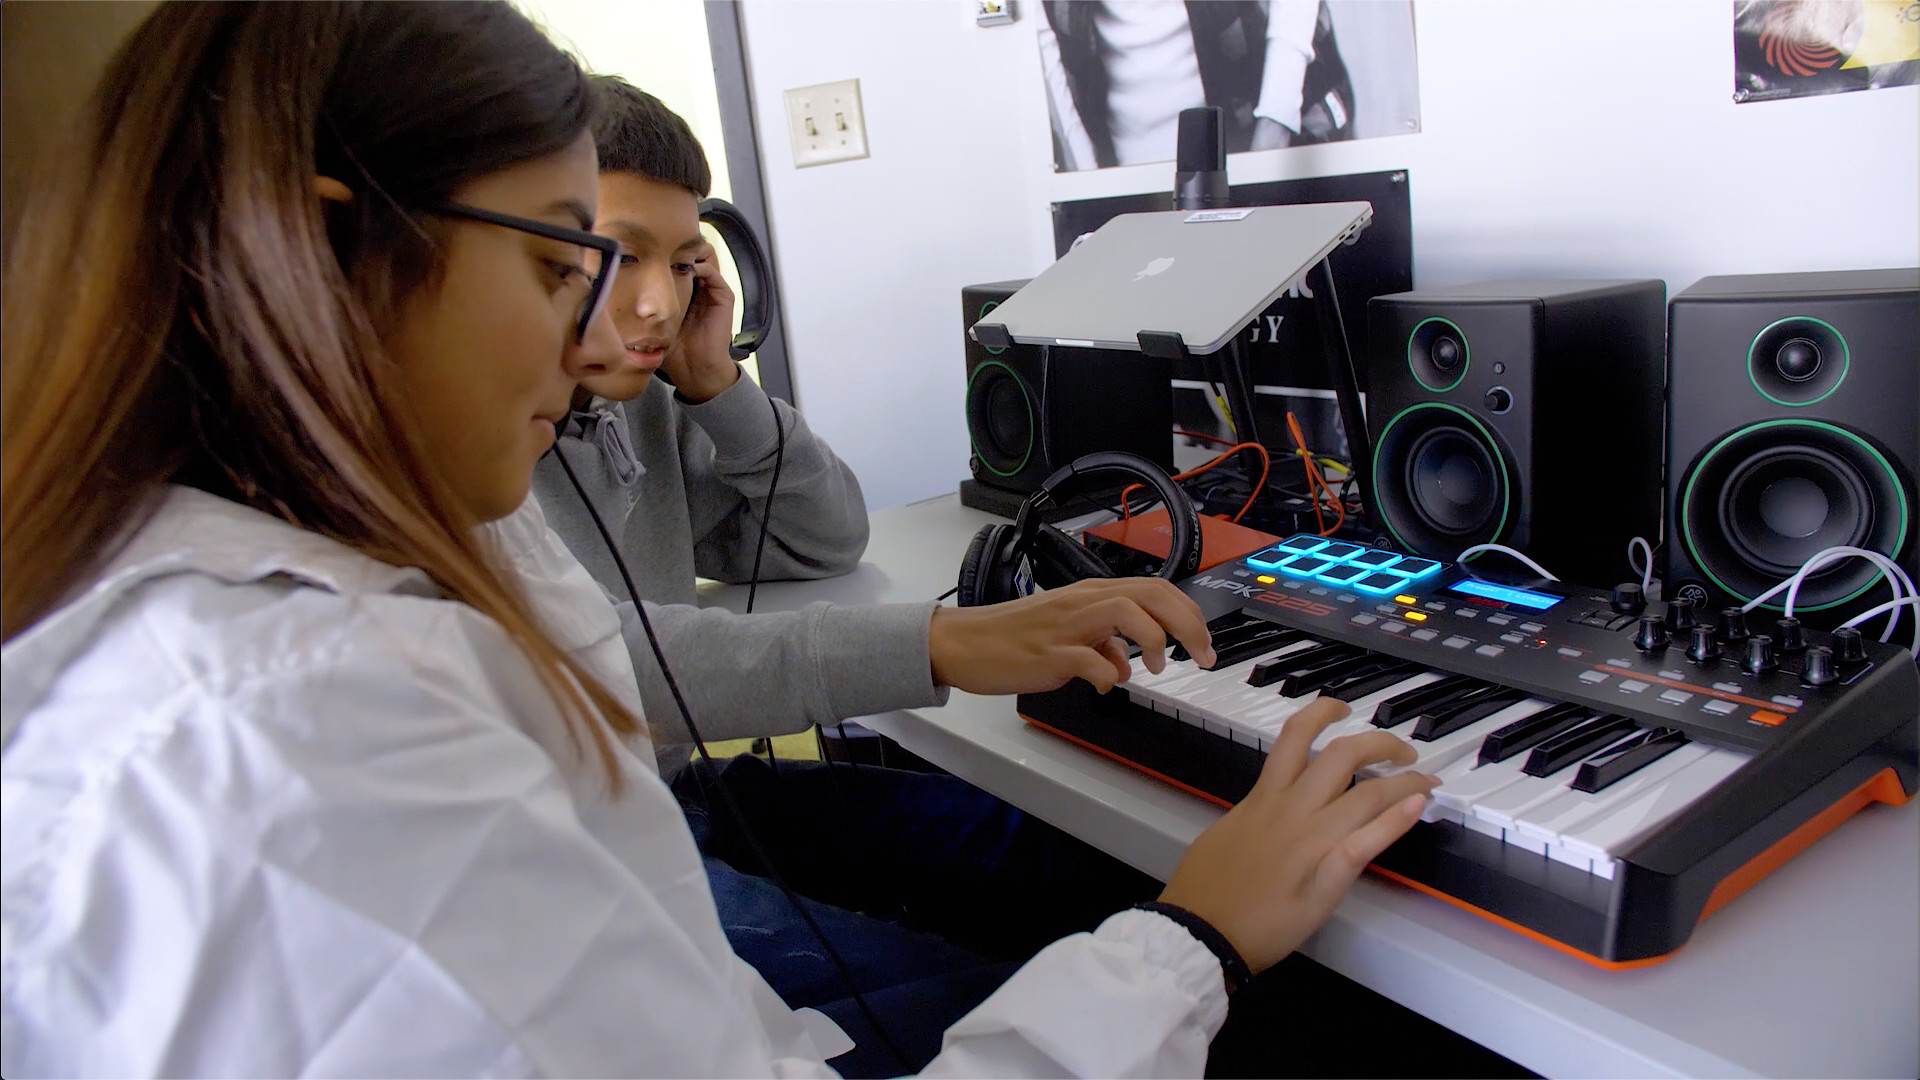 Students learning music production